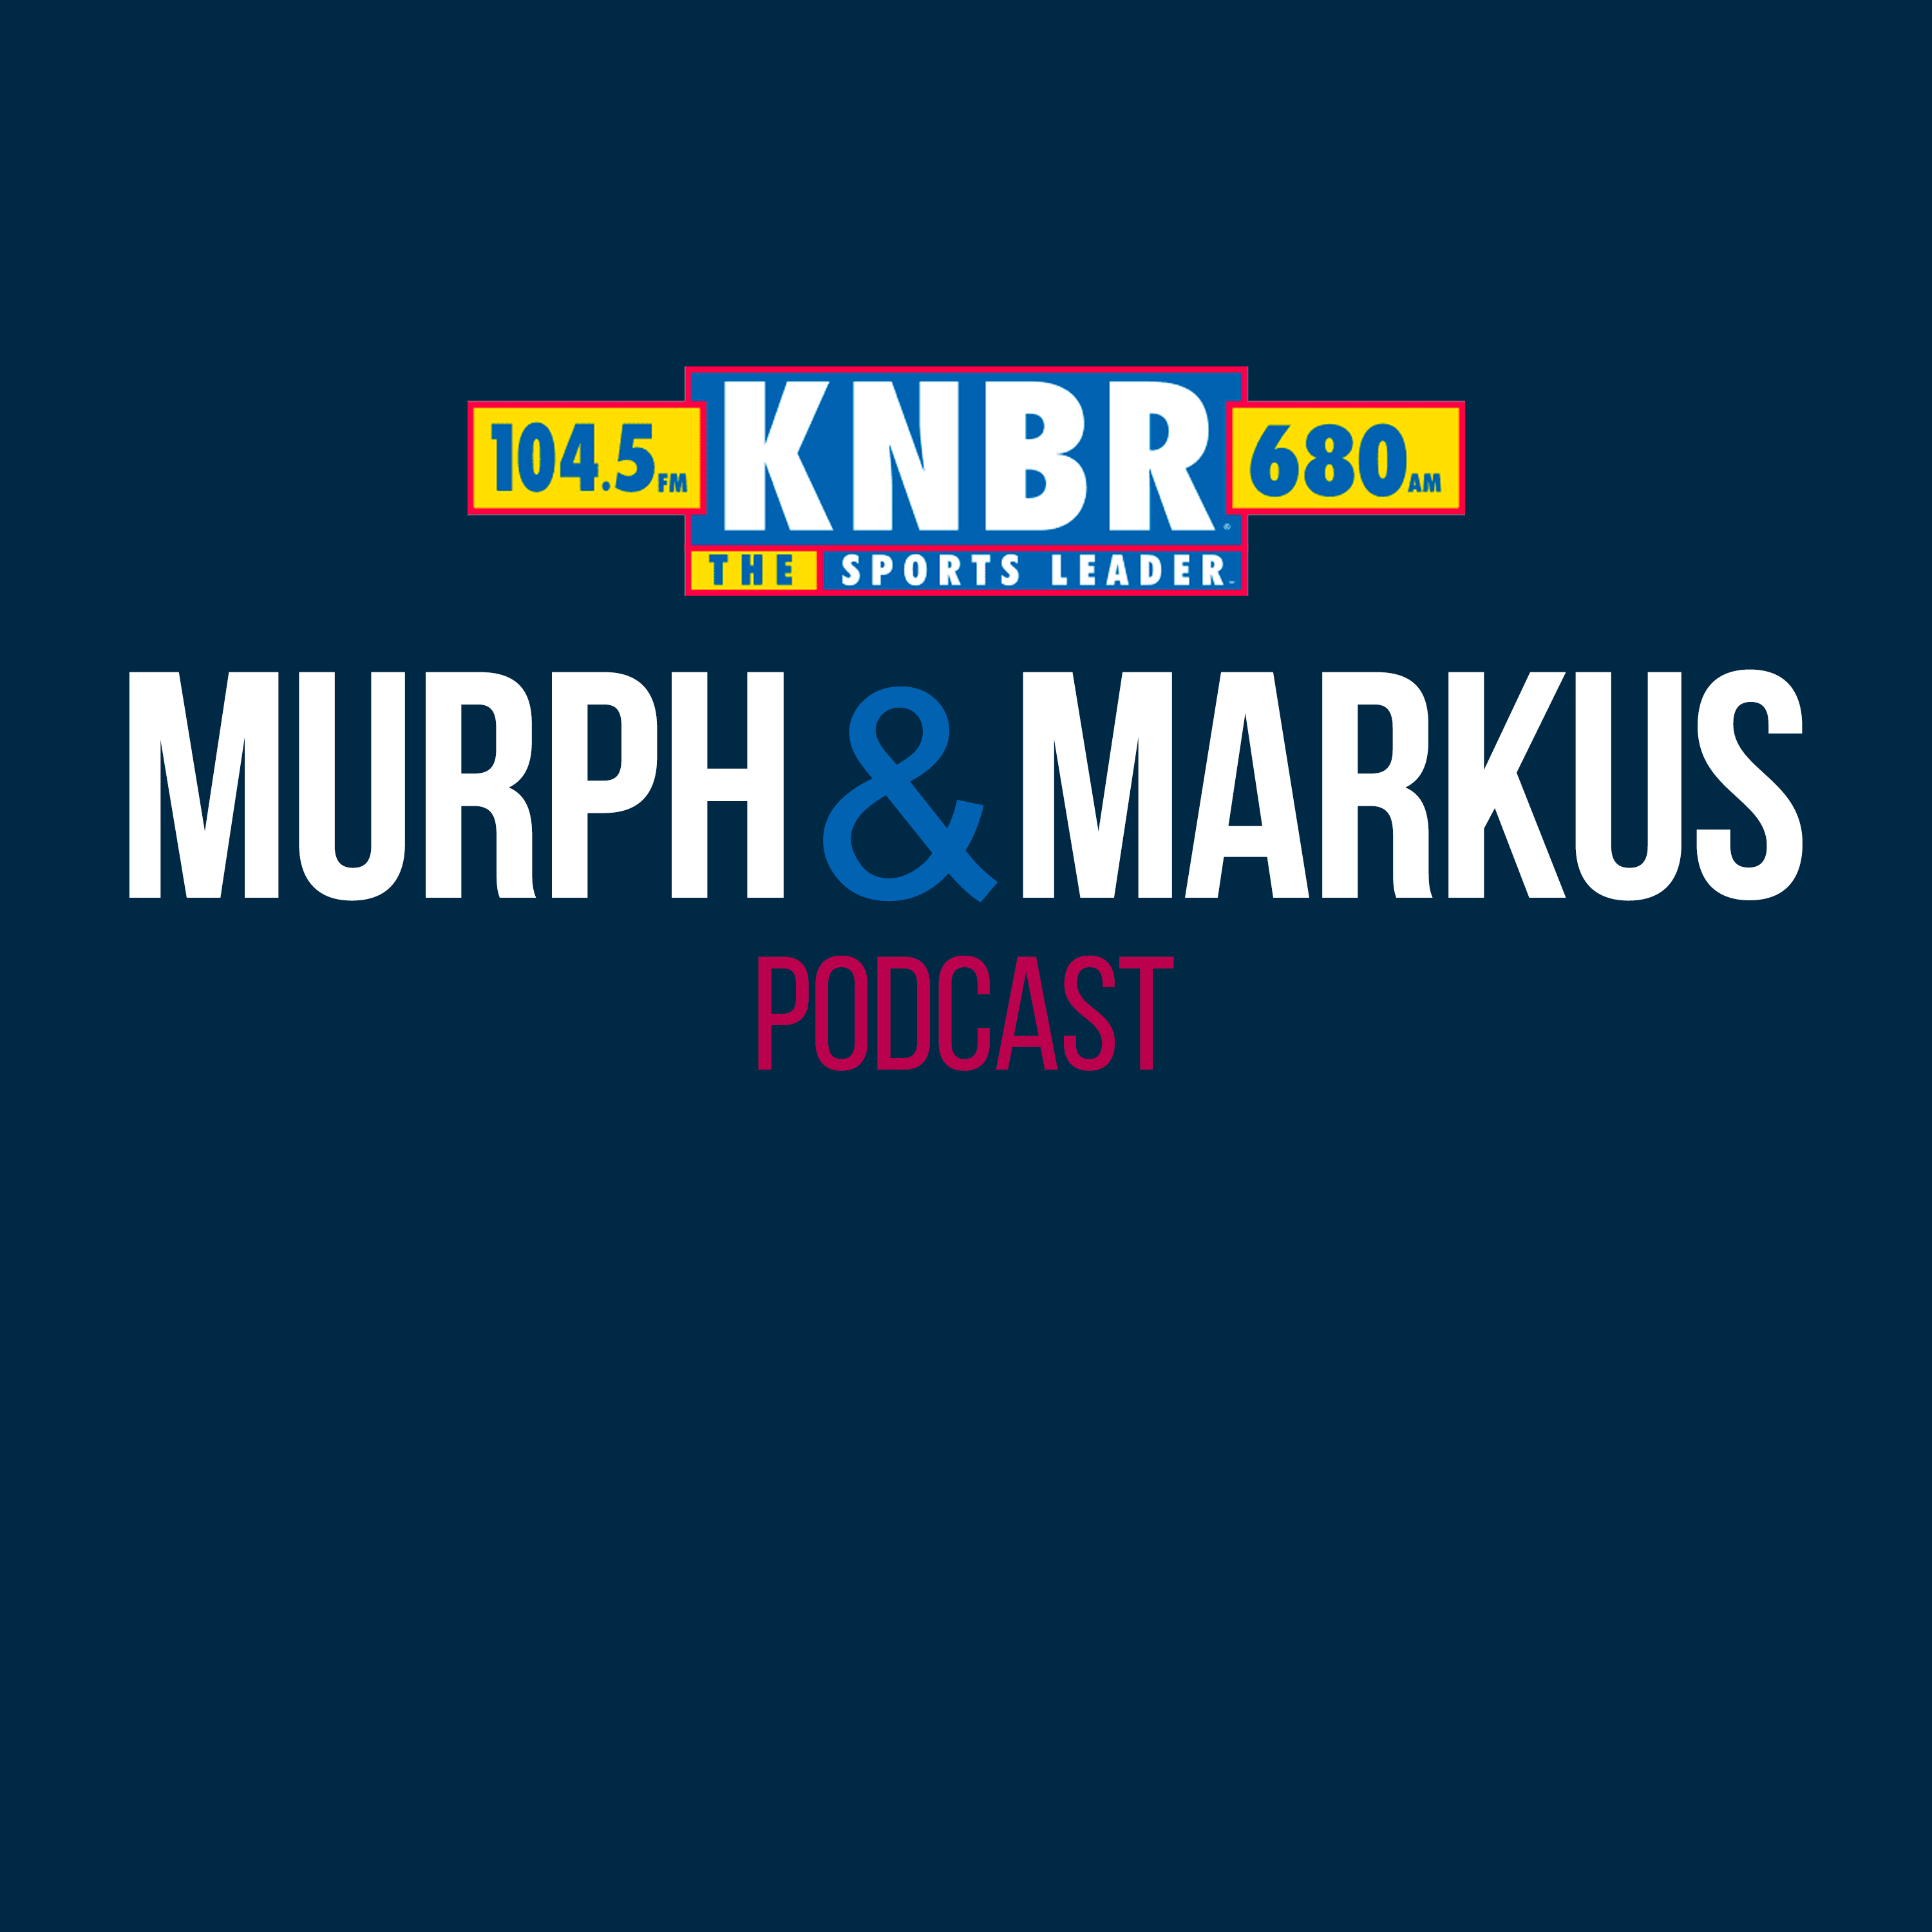 5-9 Hour 3: Murph & Markus dive into the Cooler of Content, debate if Steph Curry will ever win another championship, and talk to Matt Maiocco